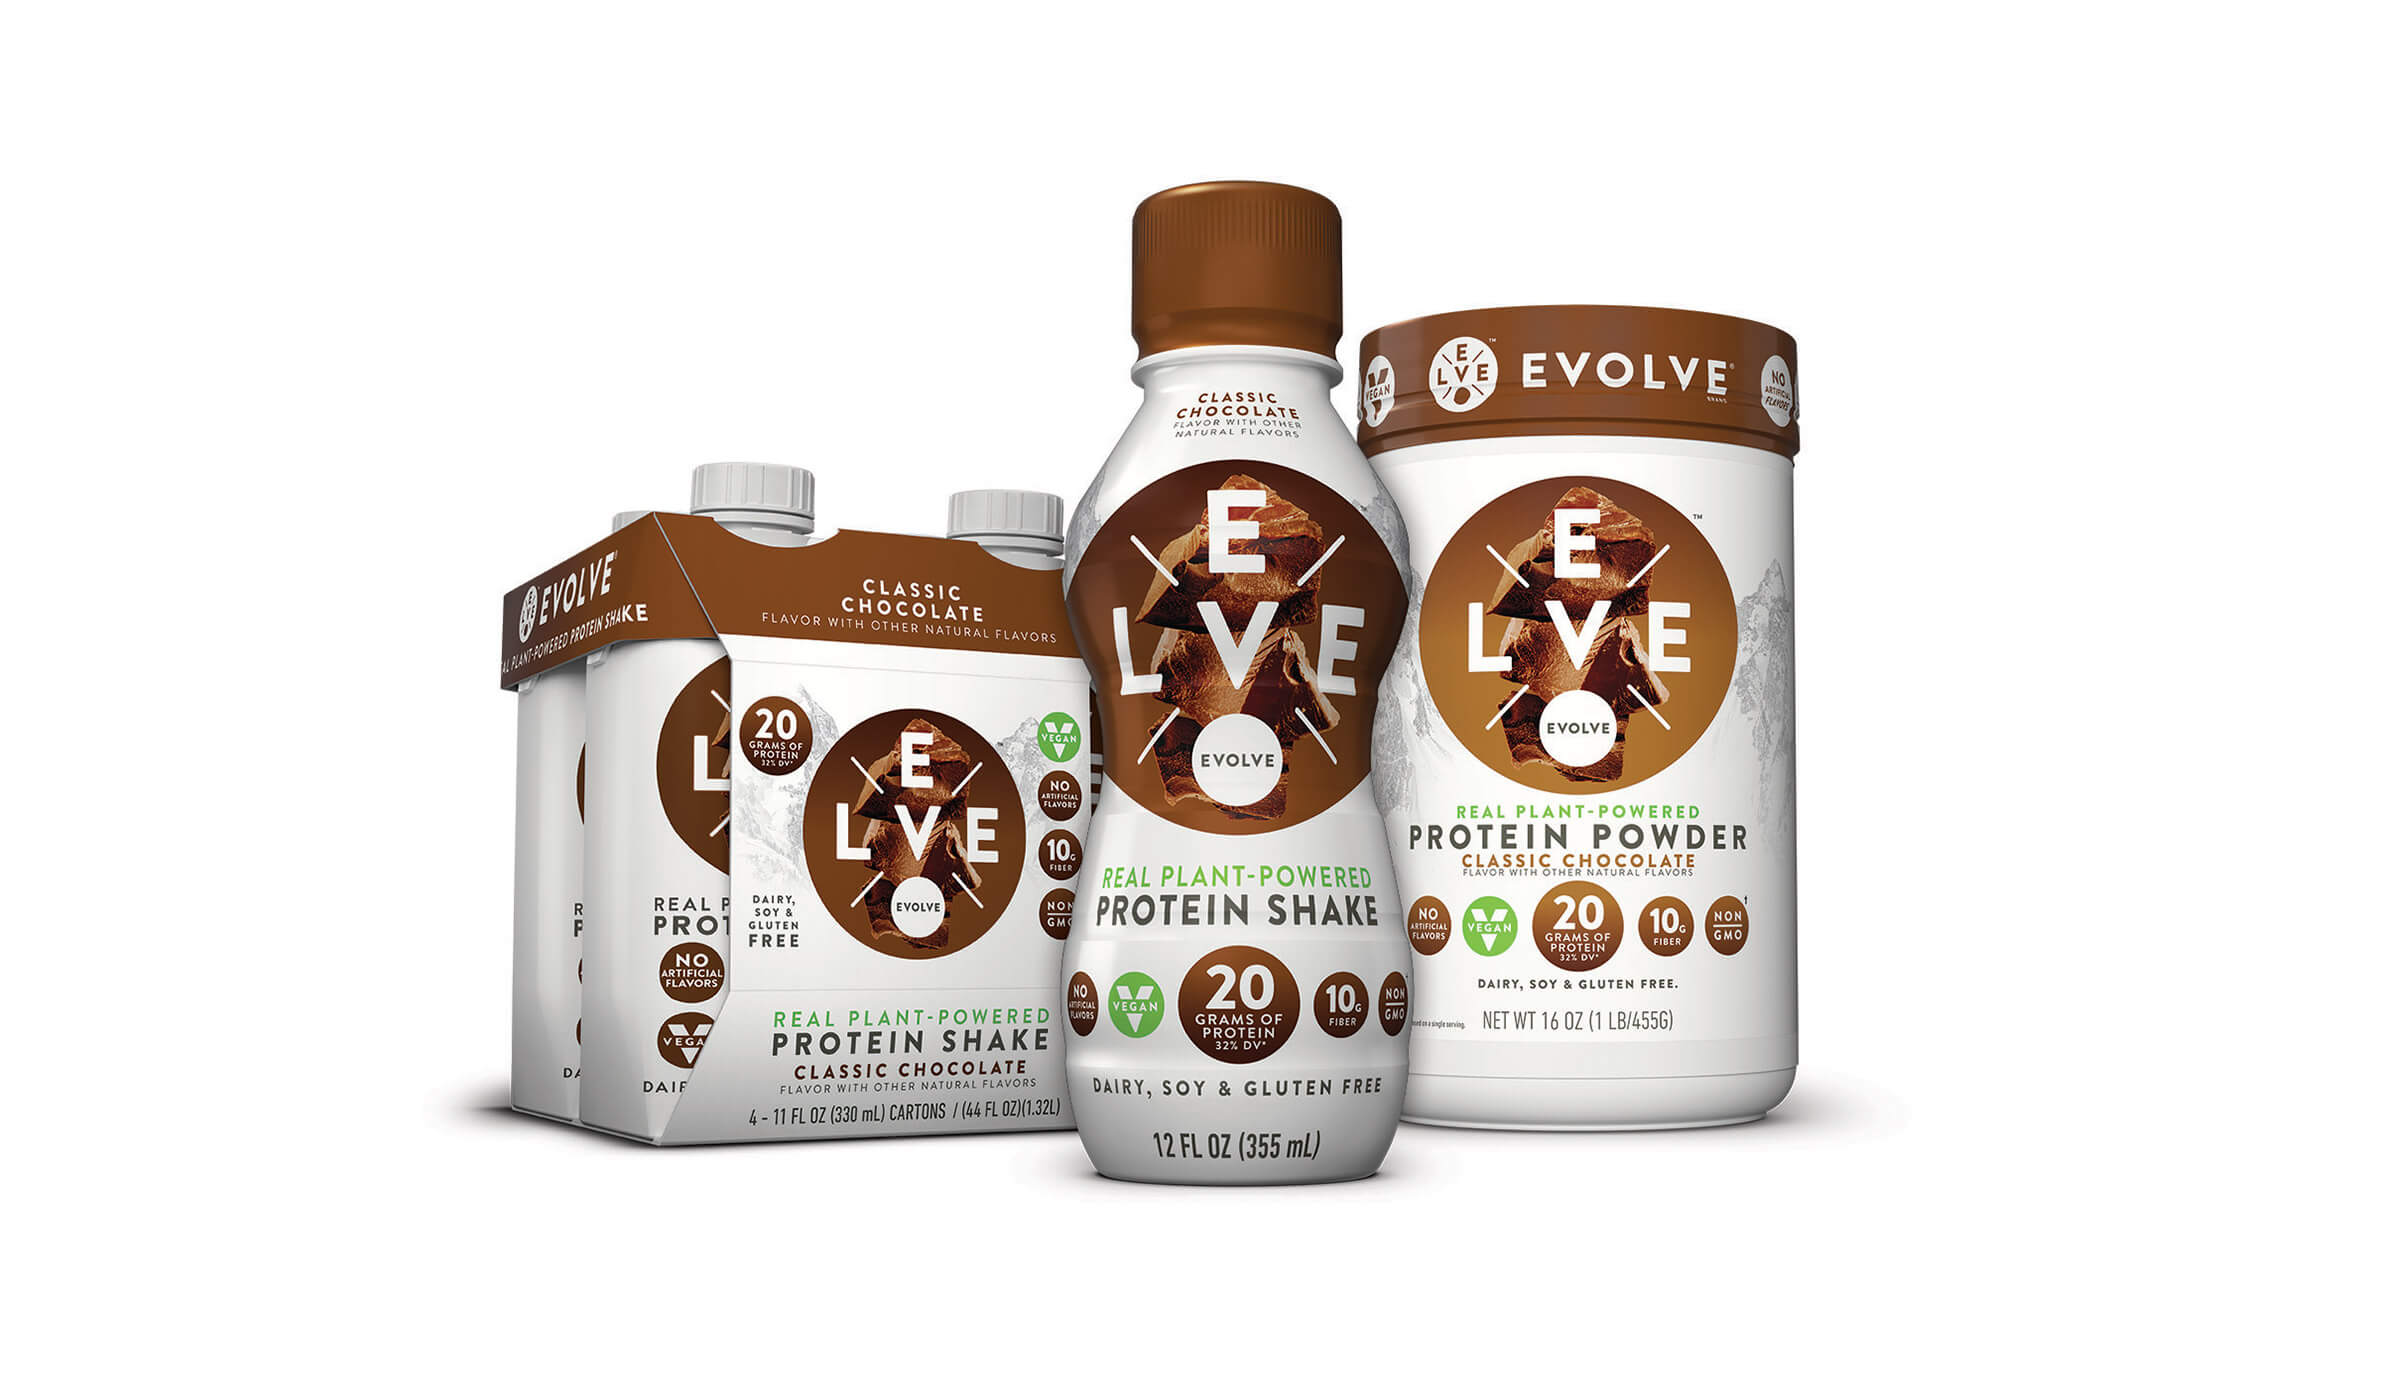 Evolve® products